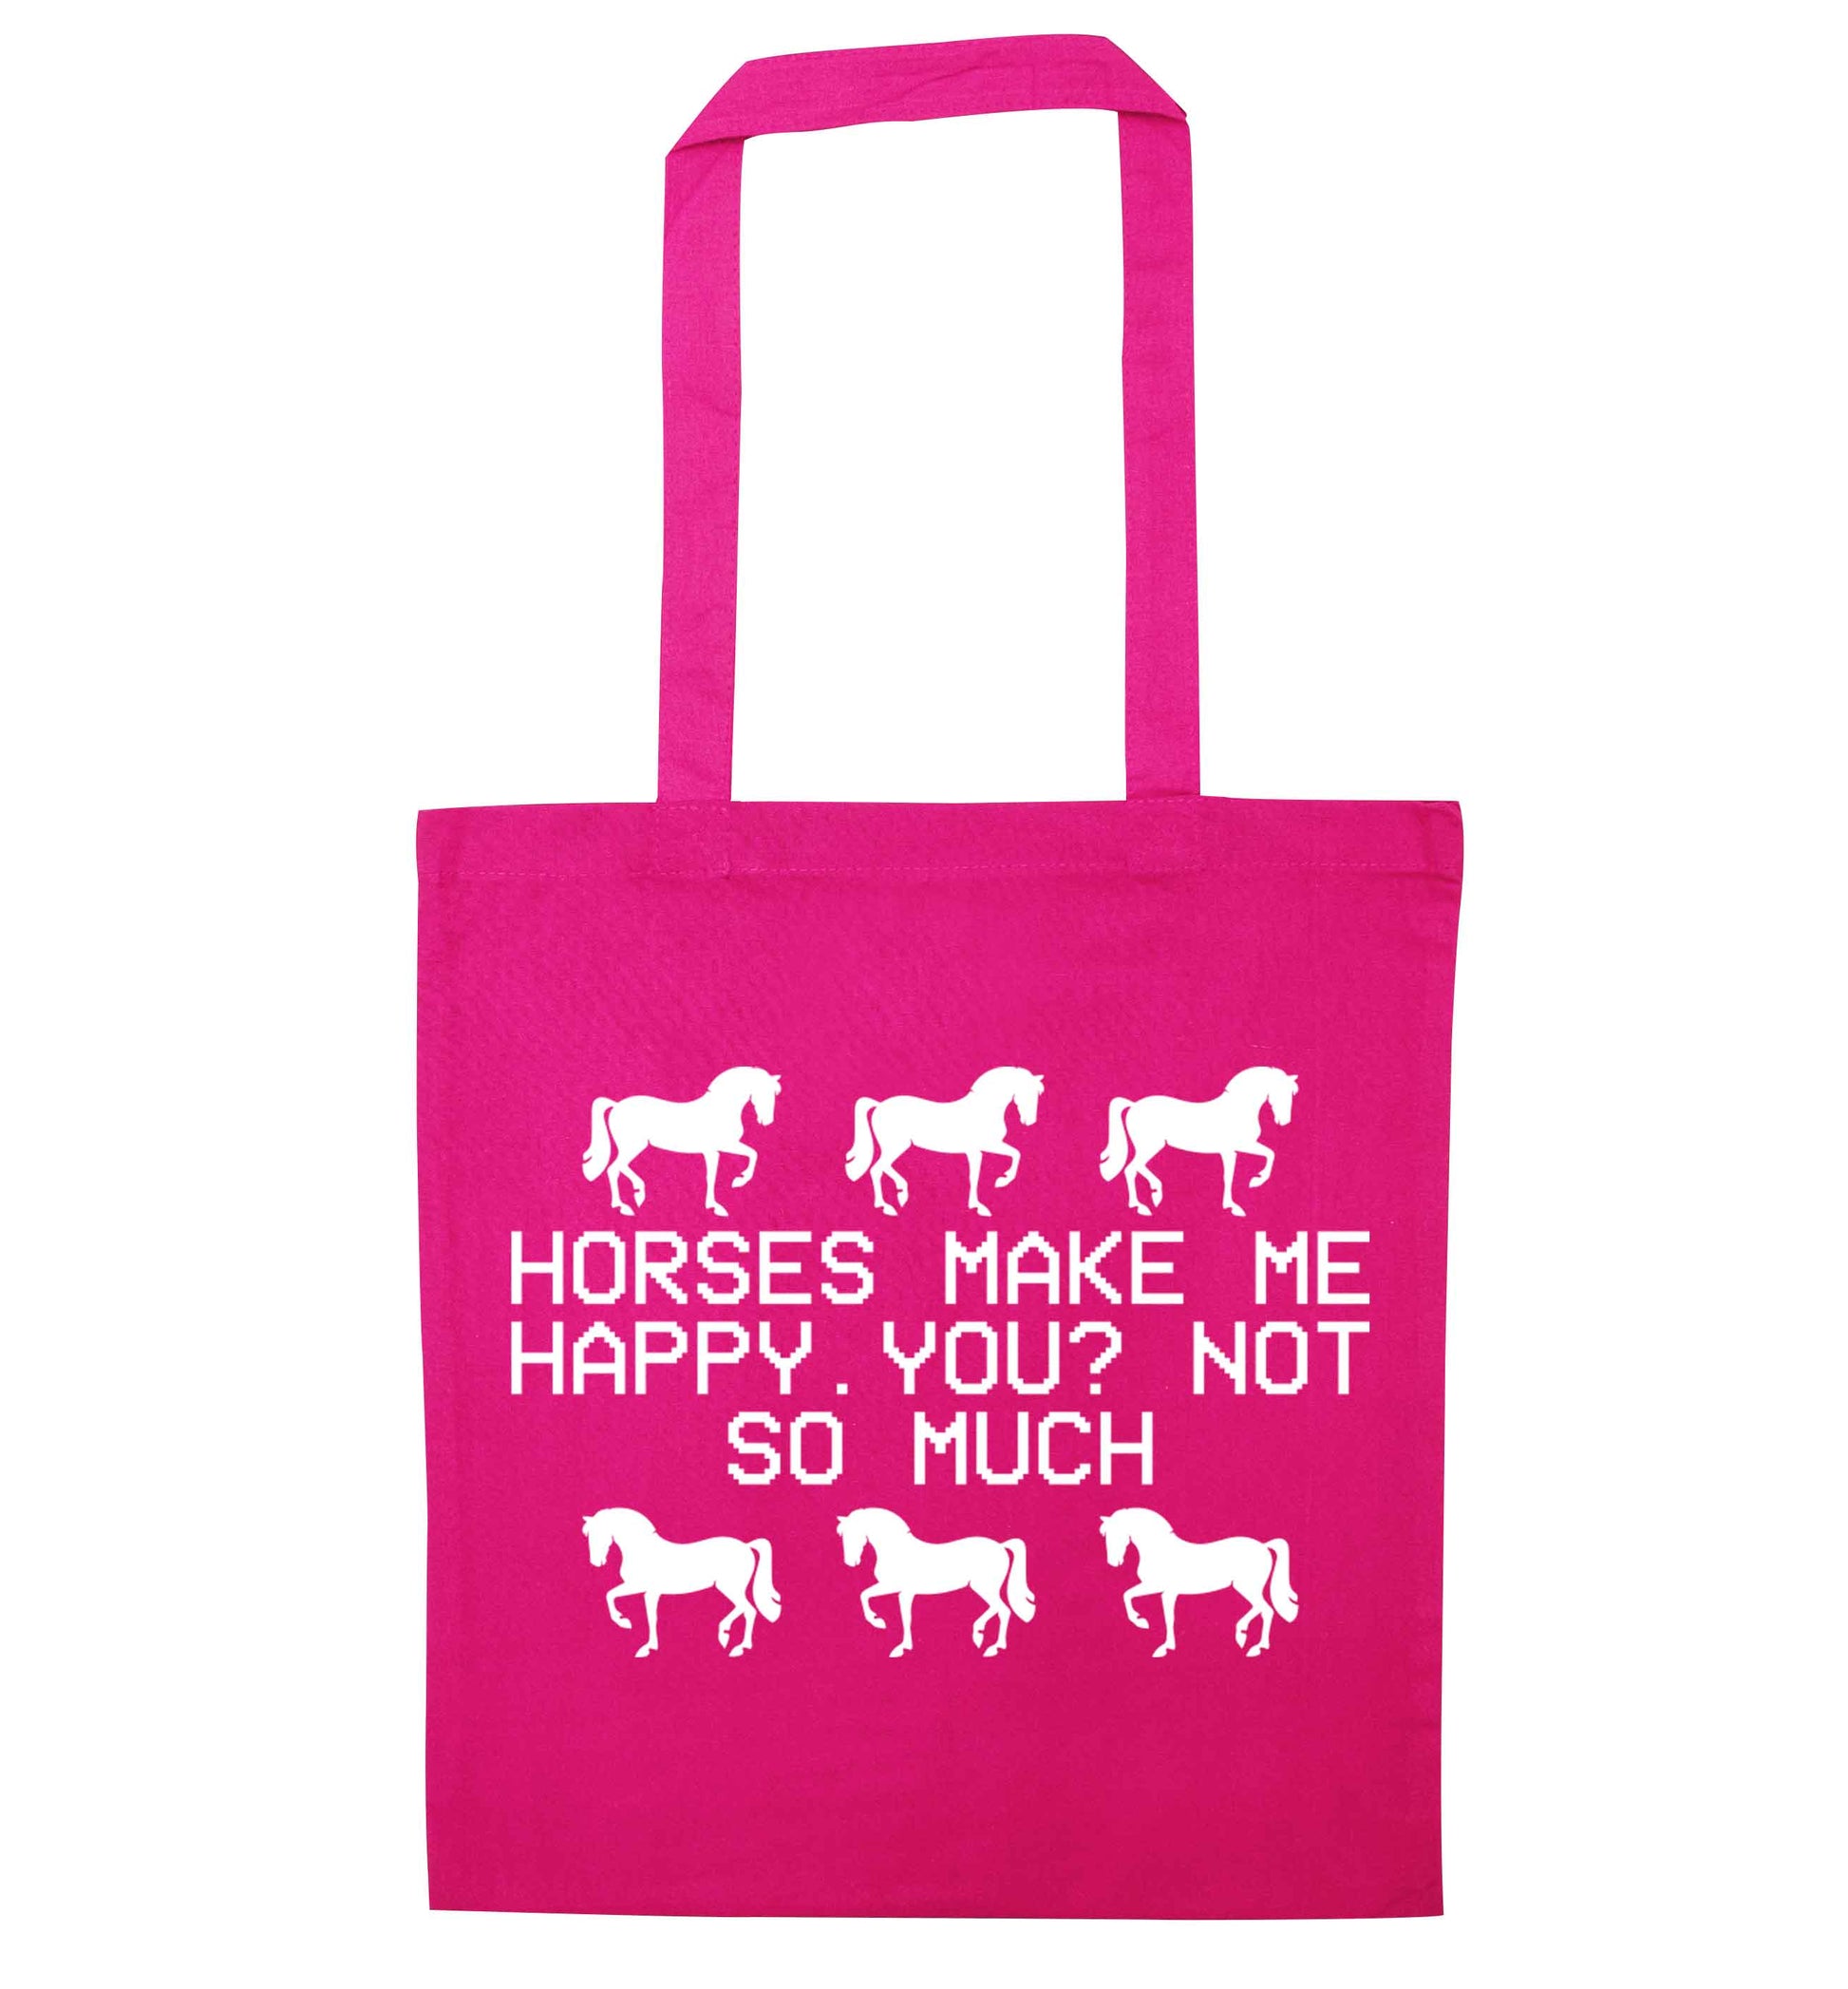 Horses make me happy, you not so much pink tote bag